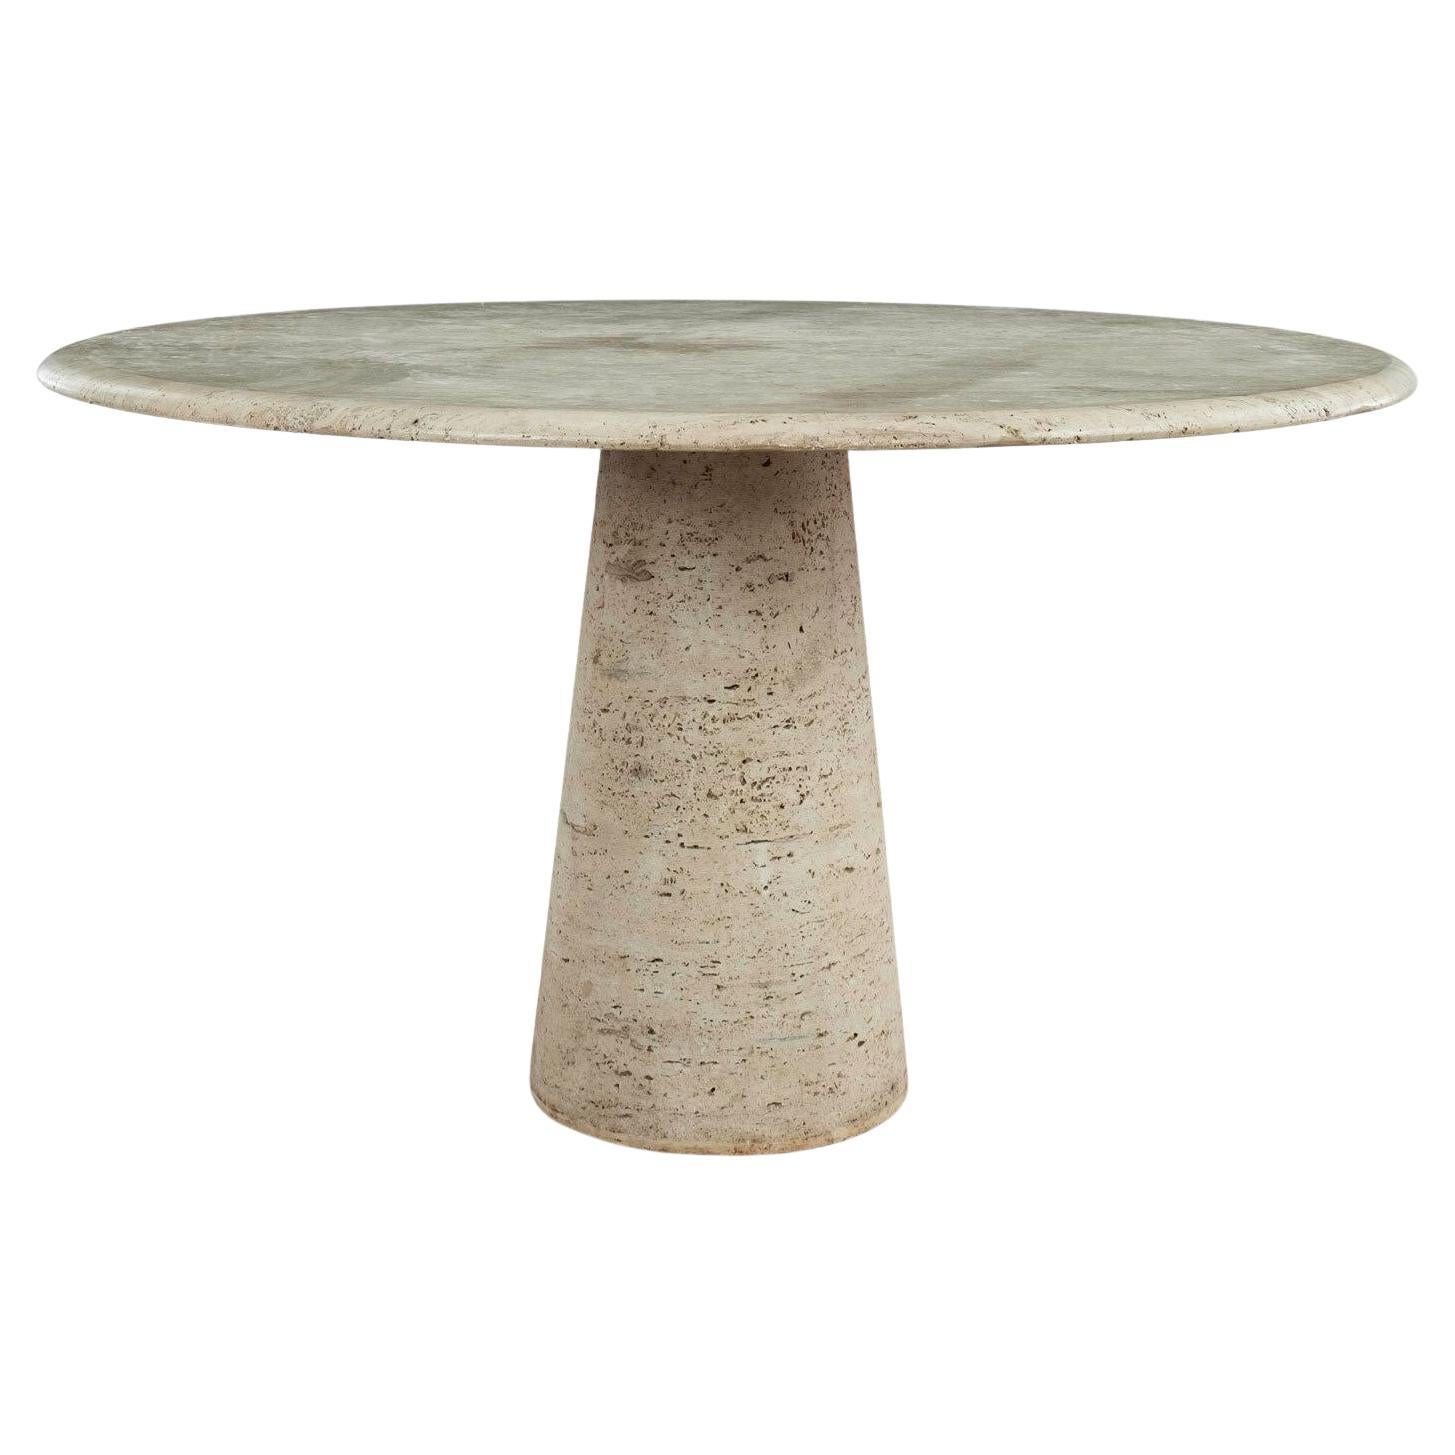 Round Cream-Color Travertine Dining Table in Style of Angelo Mangiarotti